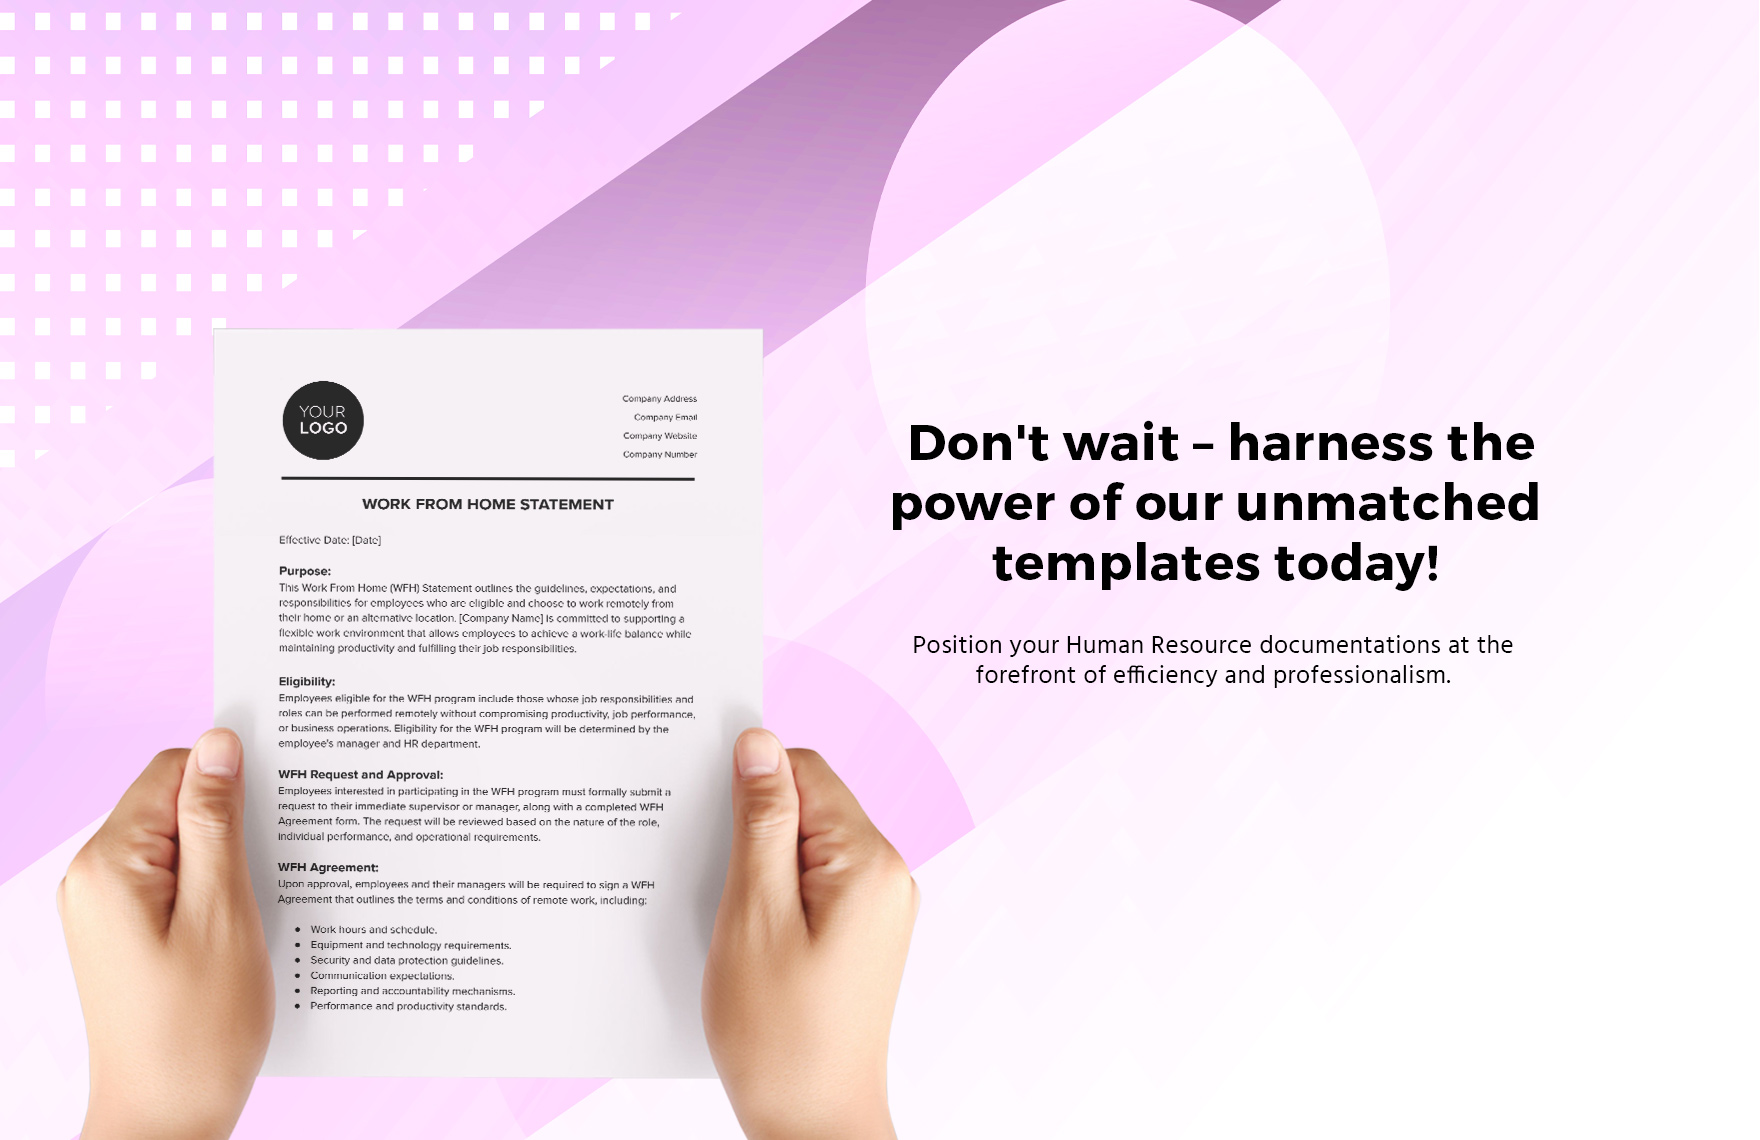 Work From Home Statement HR Template